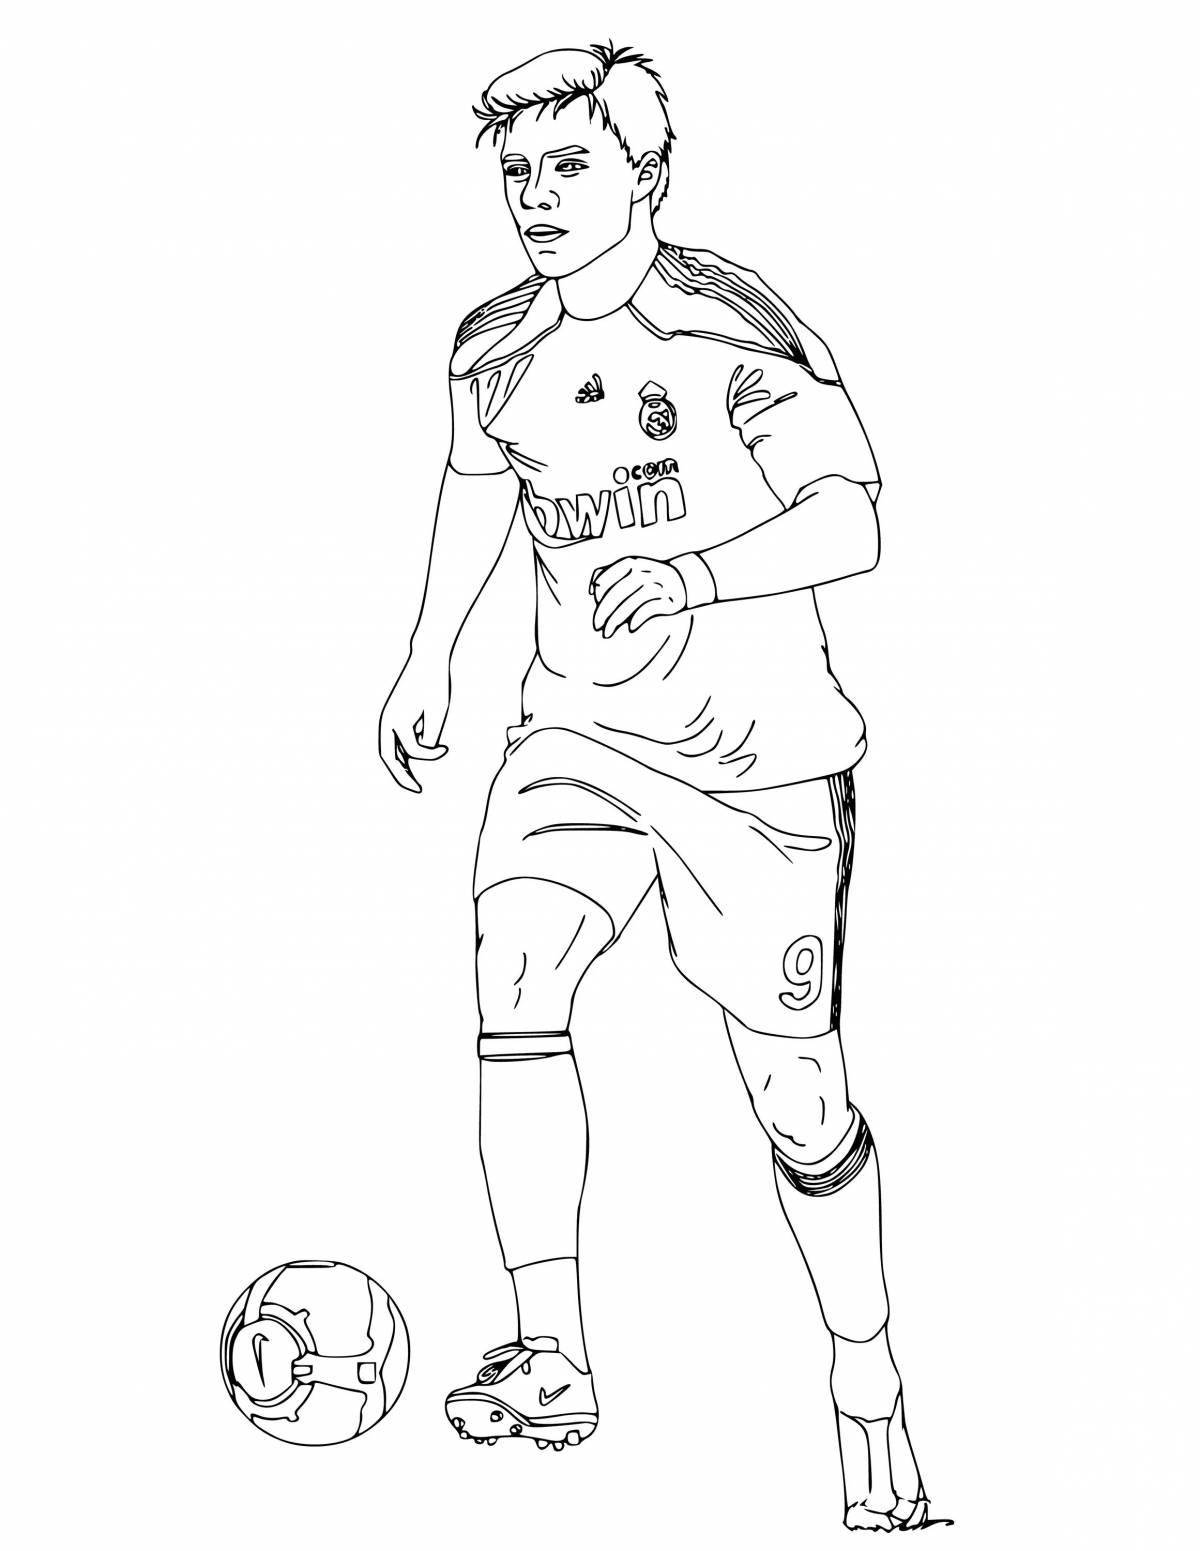 Coloring page racing football players